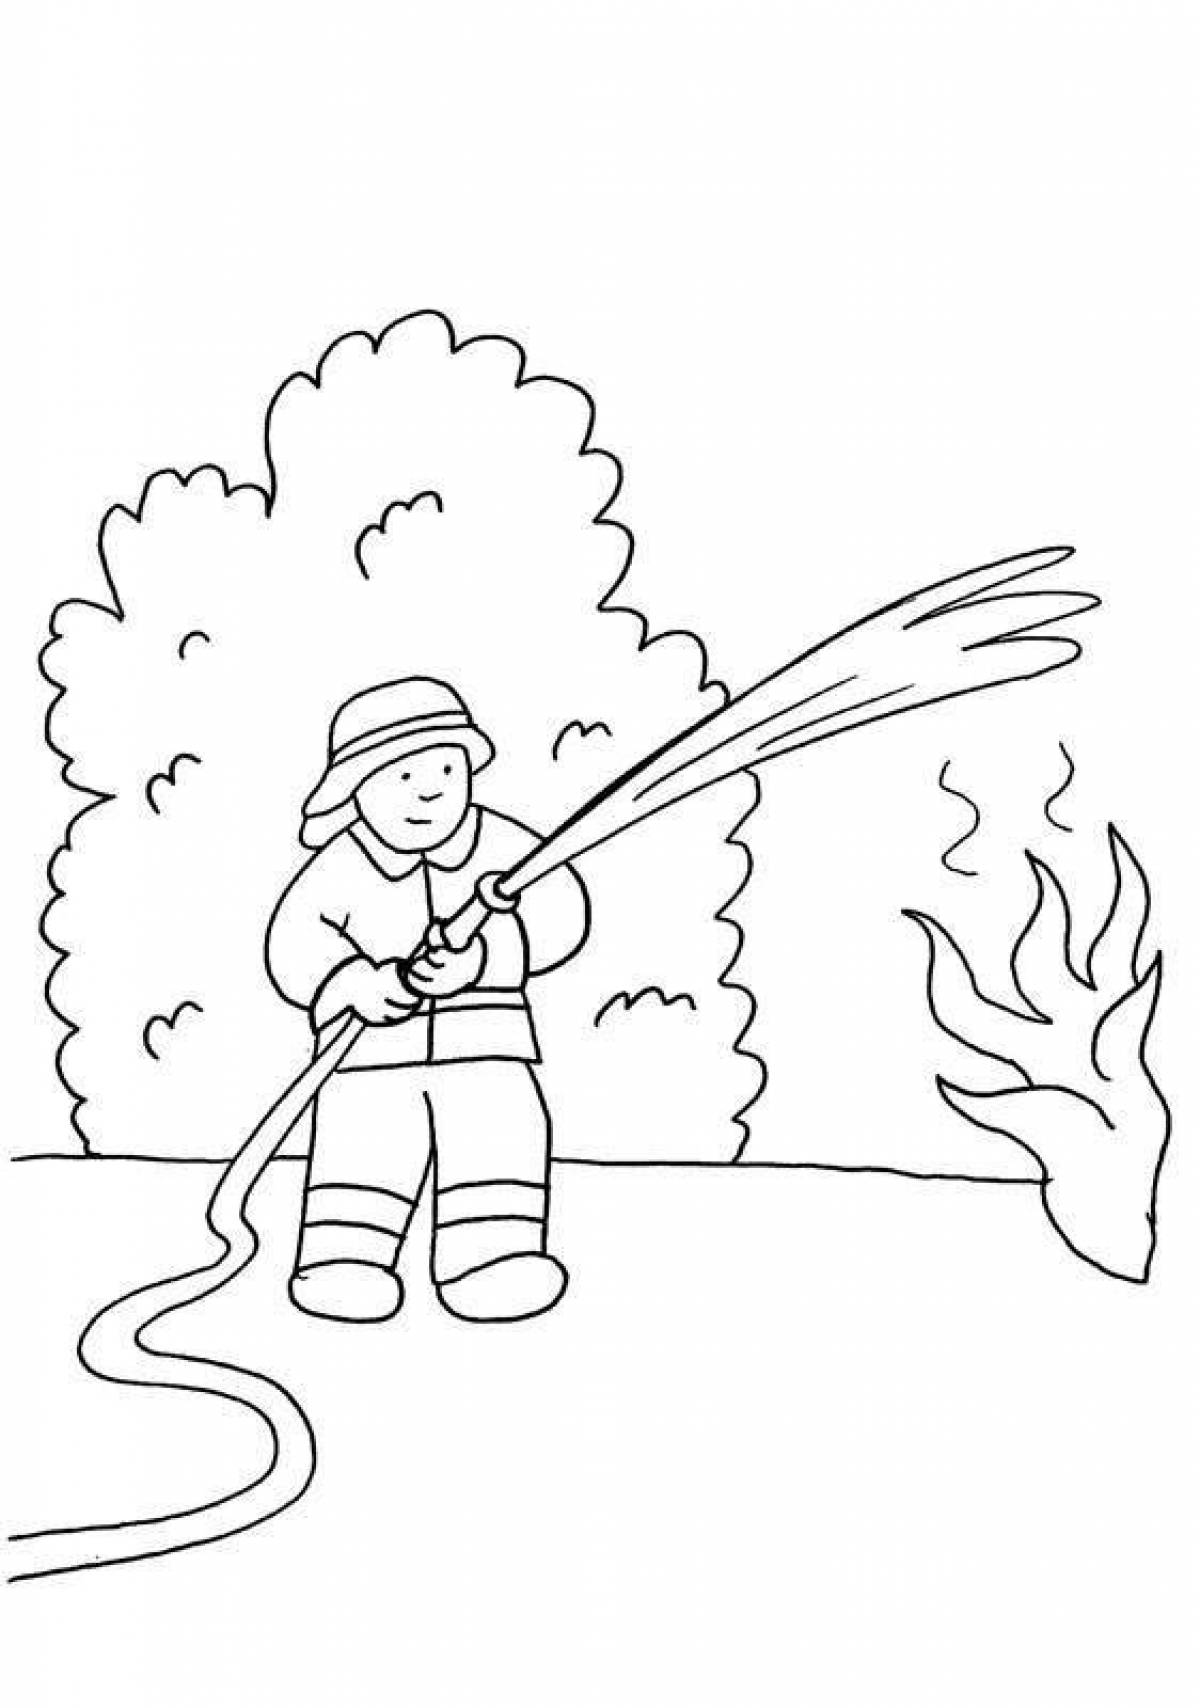 Intriguing fire safety coloring page